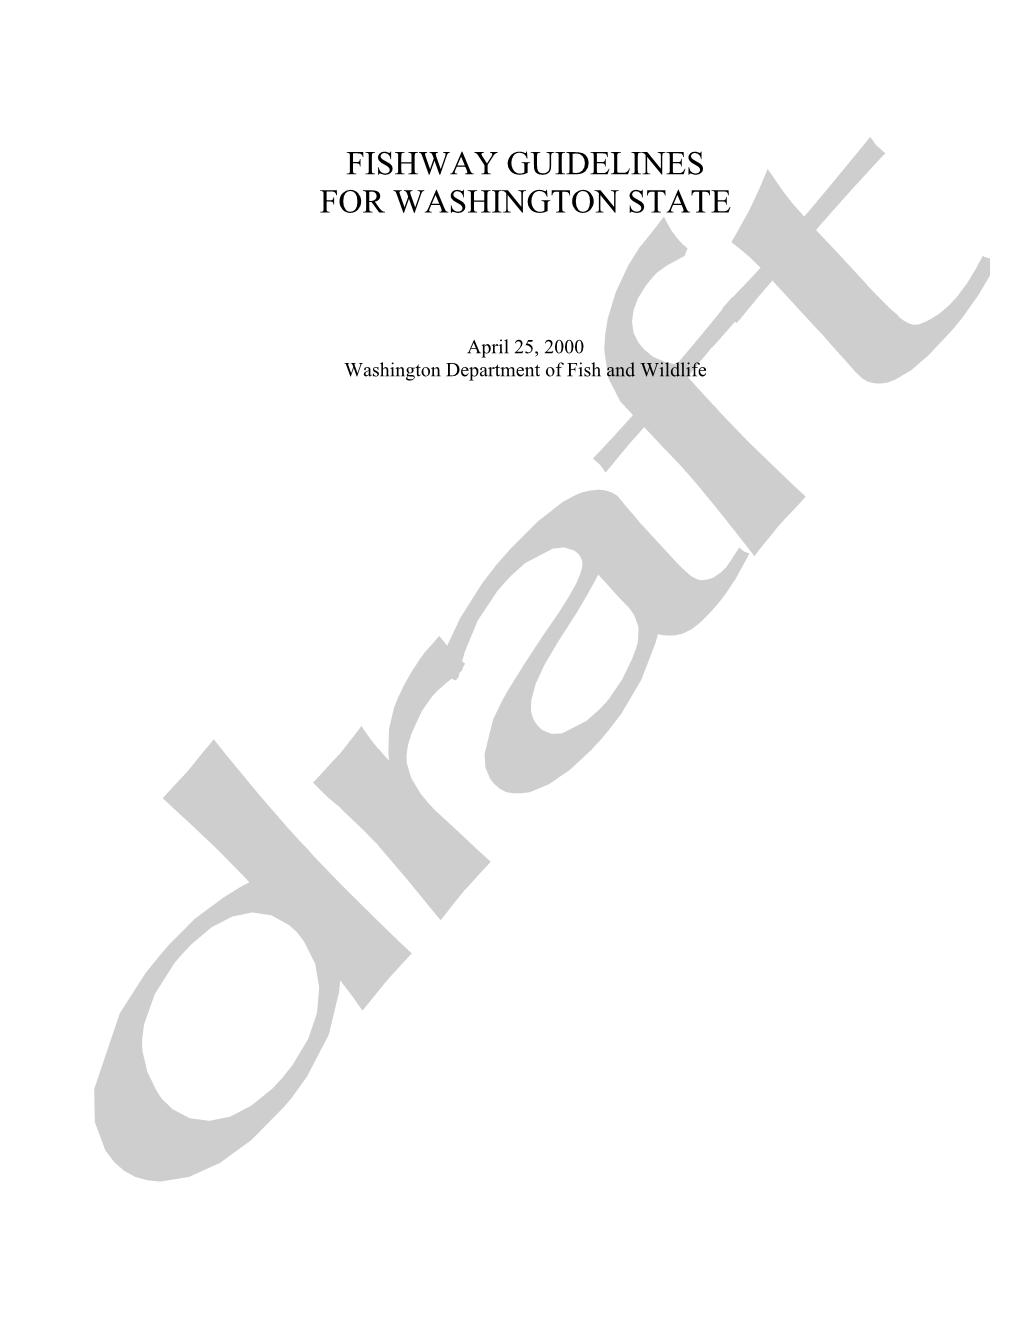 Fishway Guidelines for Washington State